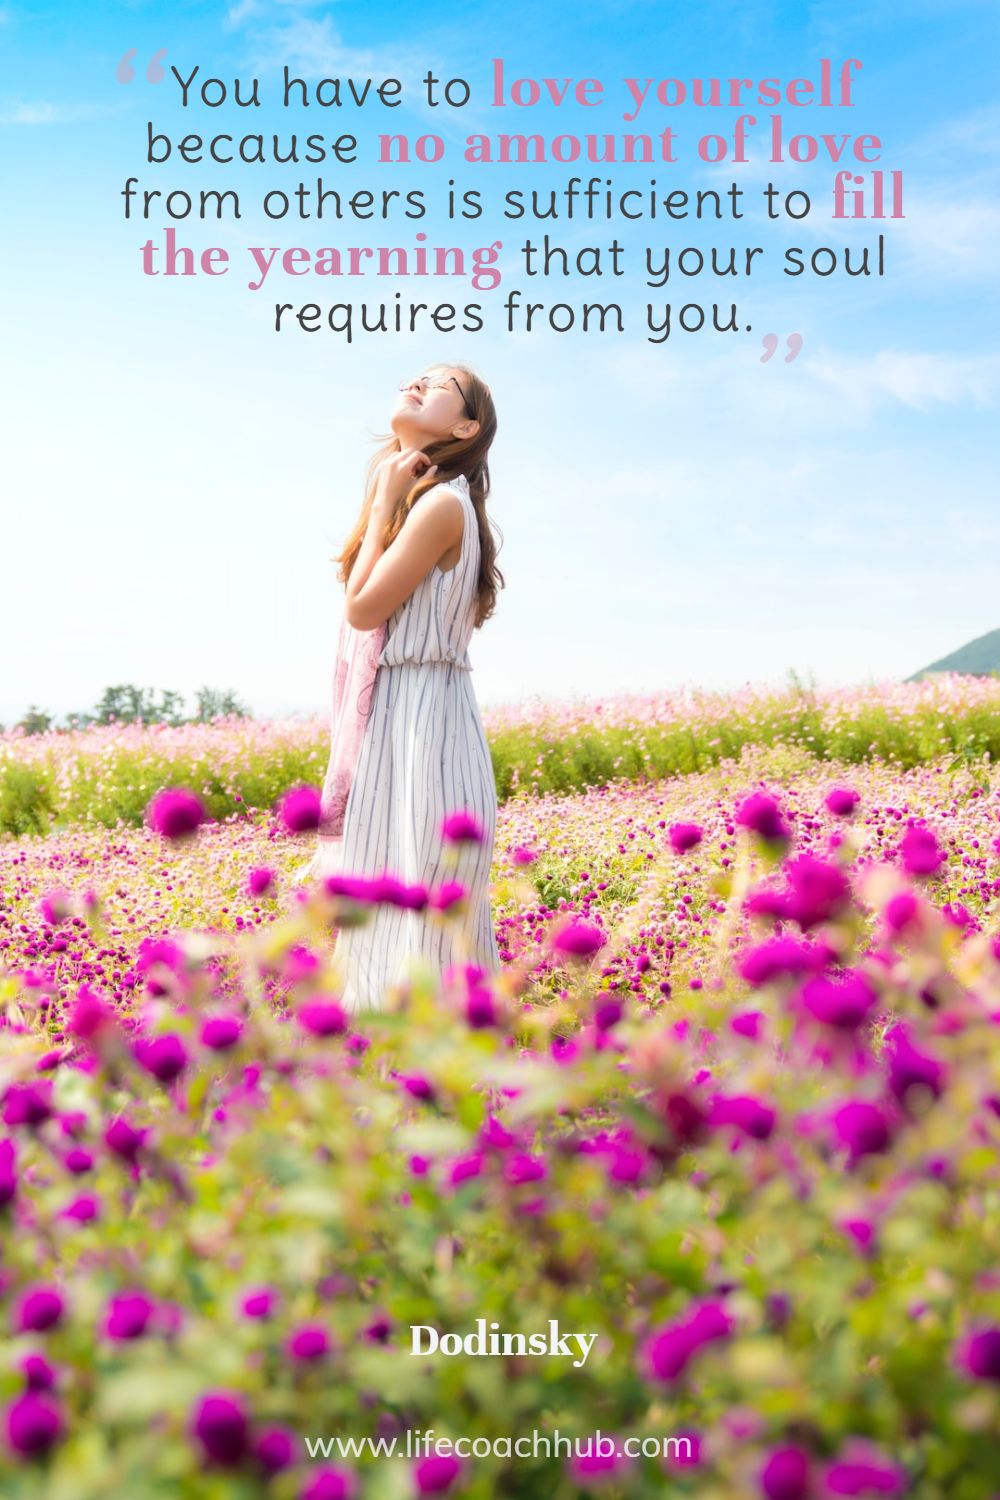 You have to love yourself because no amount of love from others is sufficient to fill the yearning that your soul requires from you. Dodinsky Coaching Quote